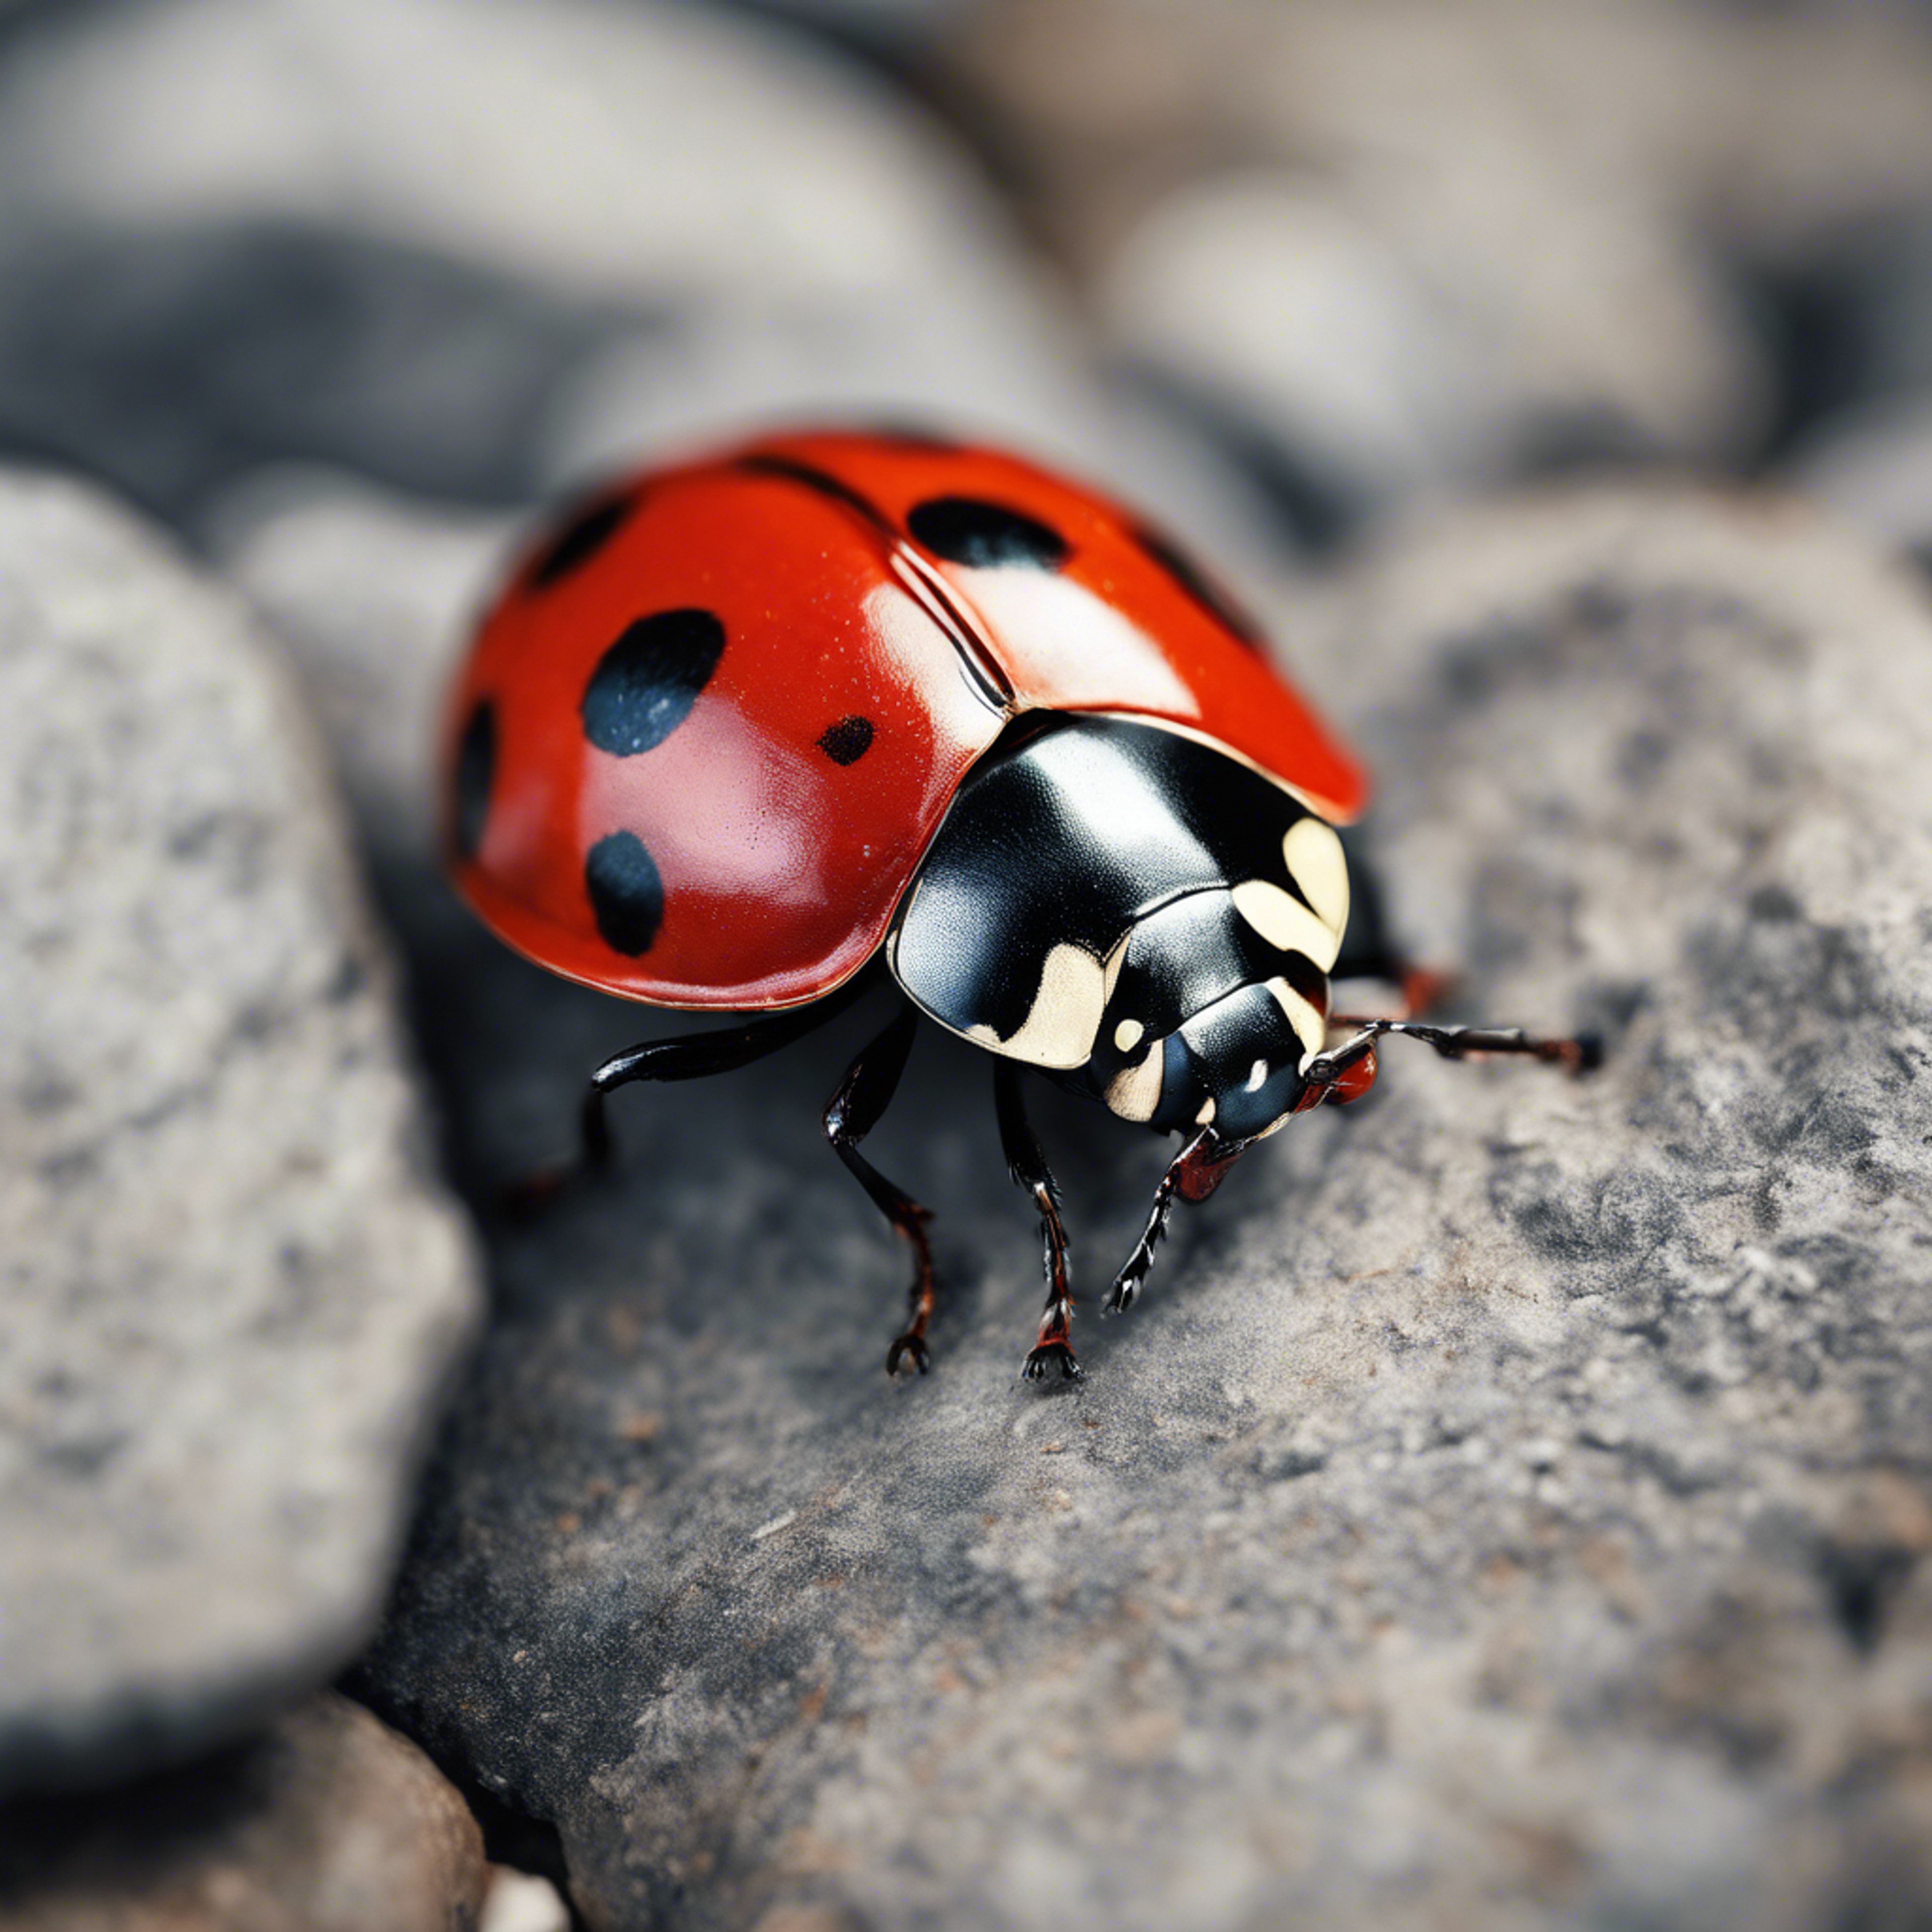 A fearless ladybug with bright red wings crawling over a dull, grey stone. ورق الجدران[cb02e673ce6f479eab40]